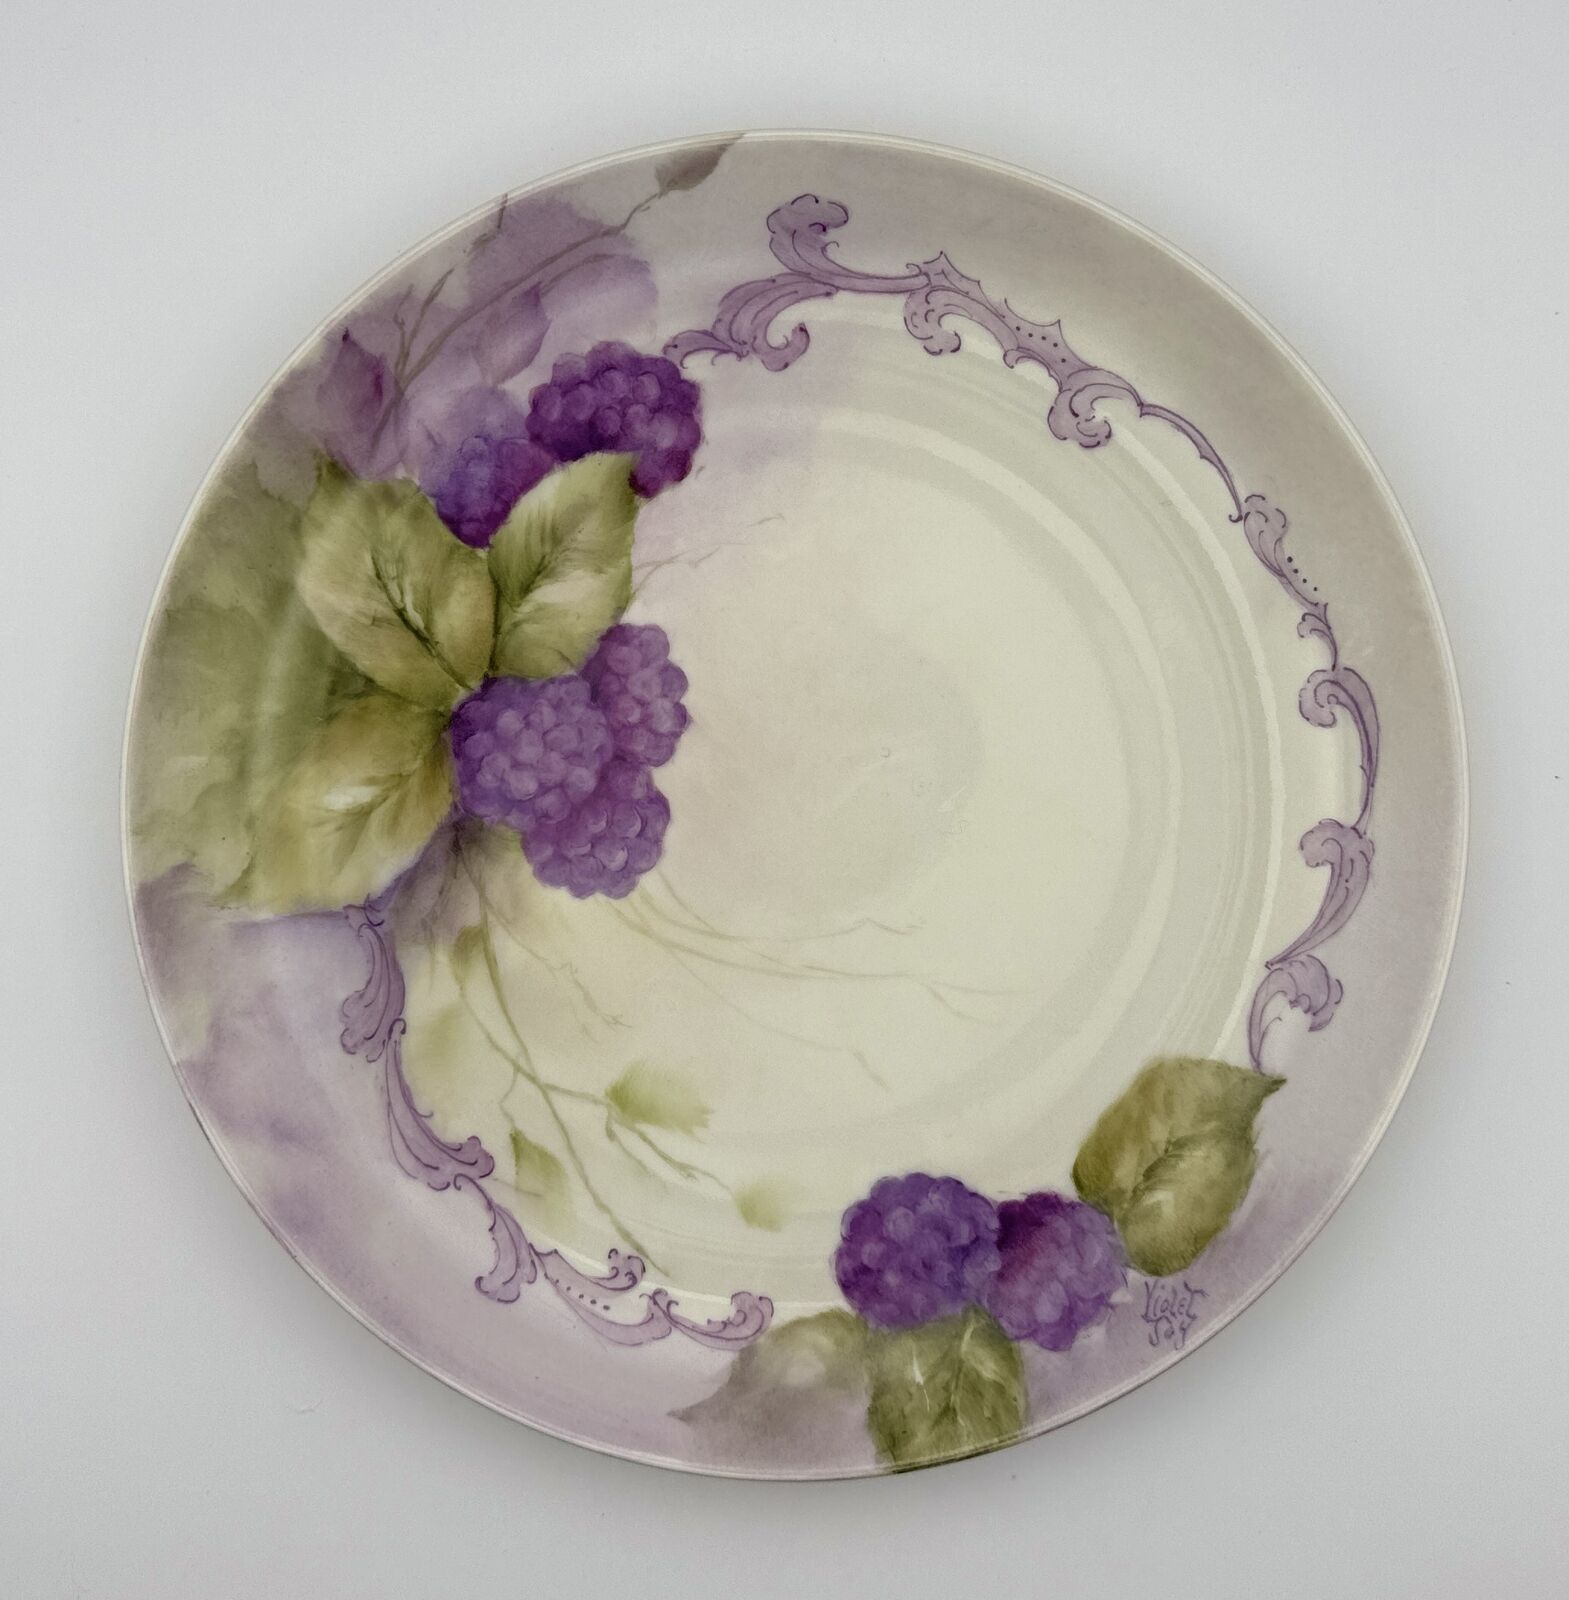 Rare Beautiful Hand-Painted Purple Floral Plate By Artist Violet Joy